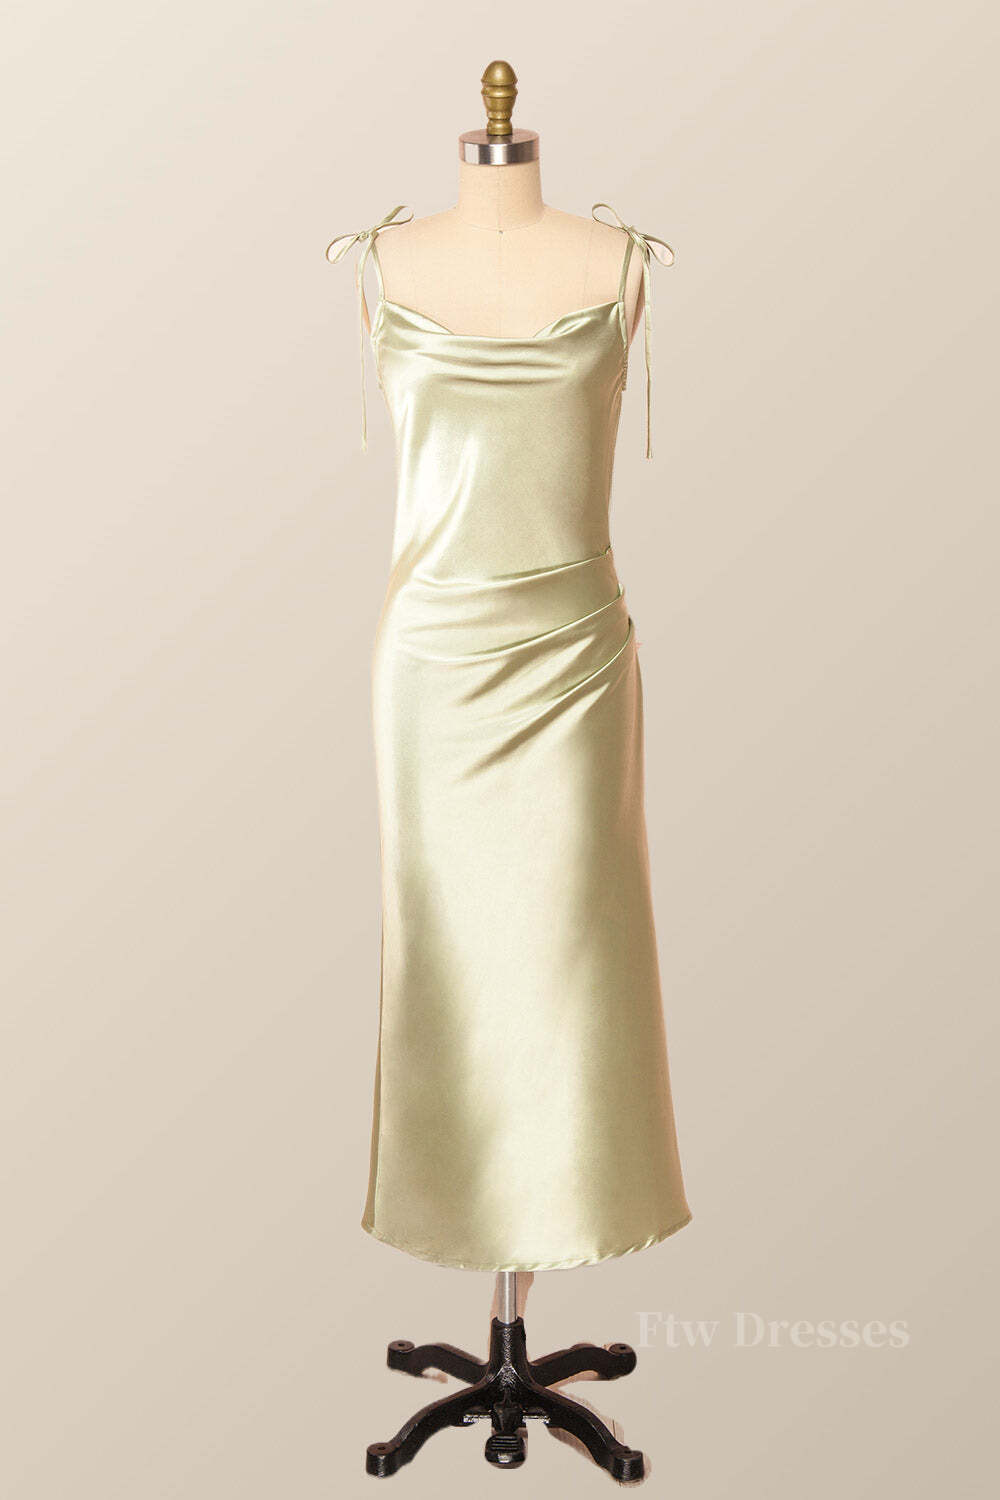 Classic Sage Green Midi Dress with Tie Shoulders